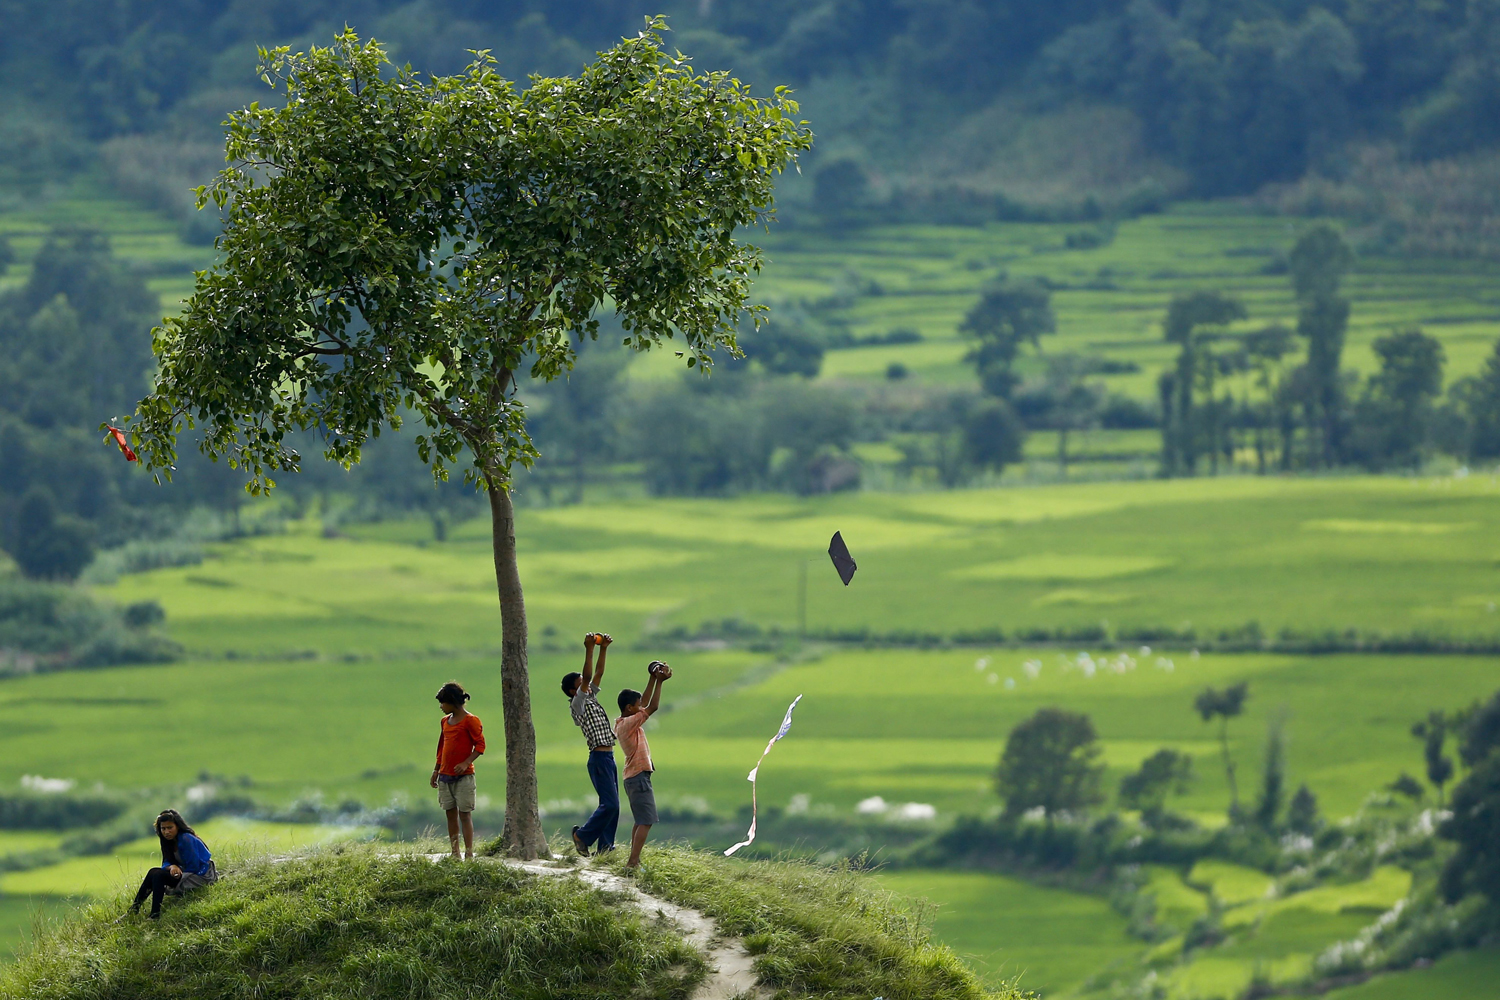 Sept. 7, 2014. Nepalese children fly a kite from a hill in the fields surrounding the Khokana village near Kathmandu, Nepal. According to Hindu mythology, Nepalese start flying kites after rains have stopped and finishing the summer season with the message to spread that 'monsoon is over'.